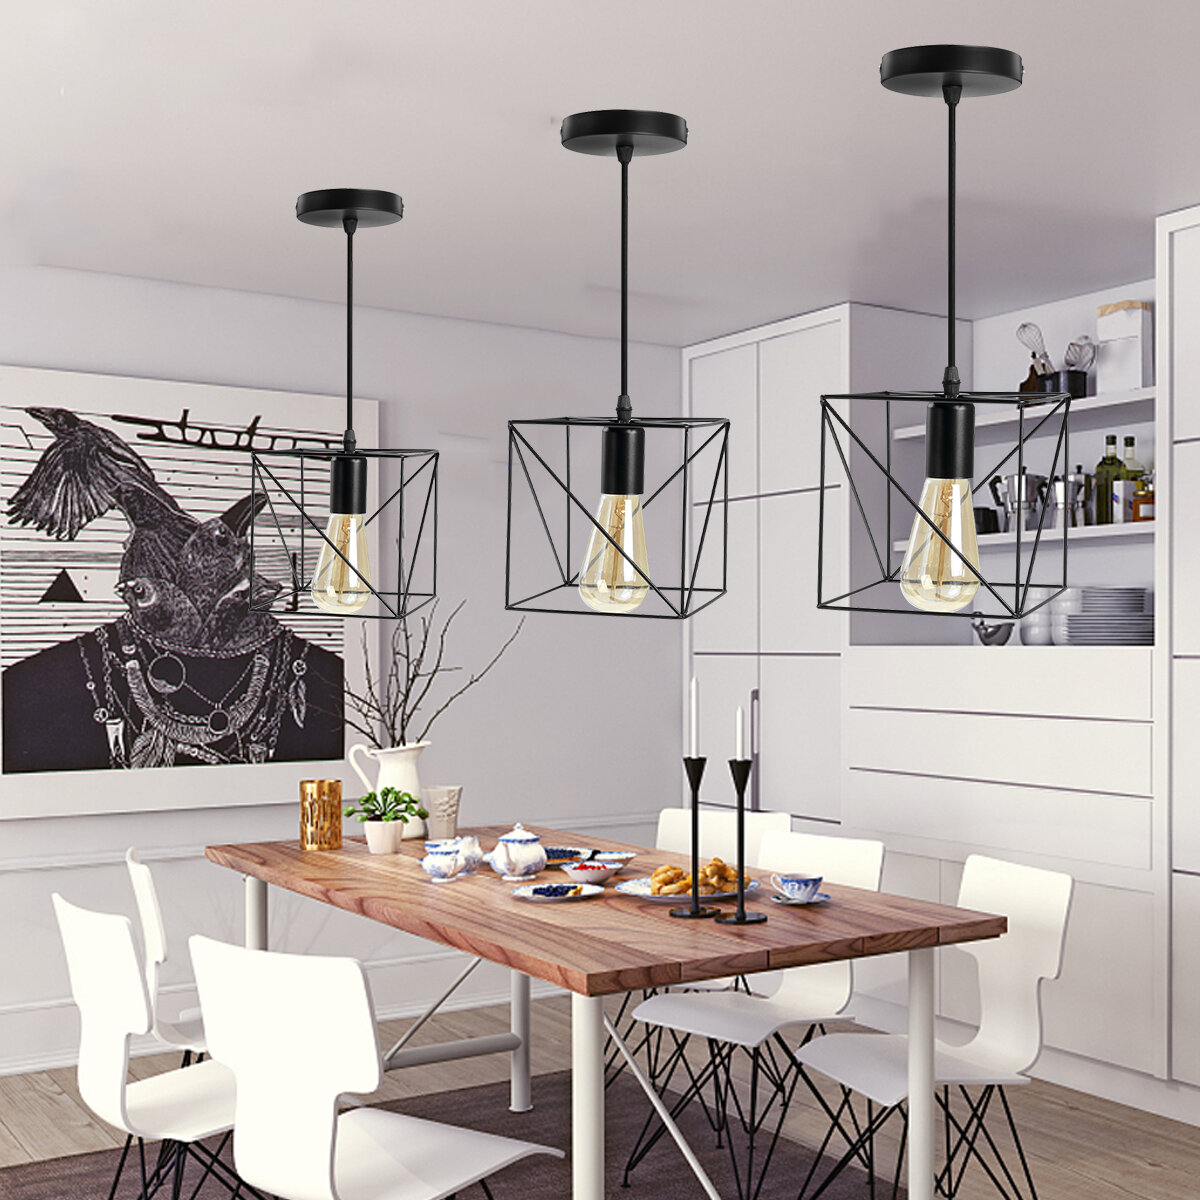 best price,metal,pendant,light,shade,ceiling,industrial,geometric,wire,cage,lamp,discount